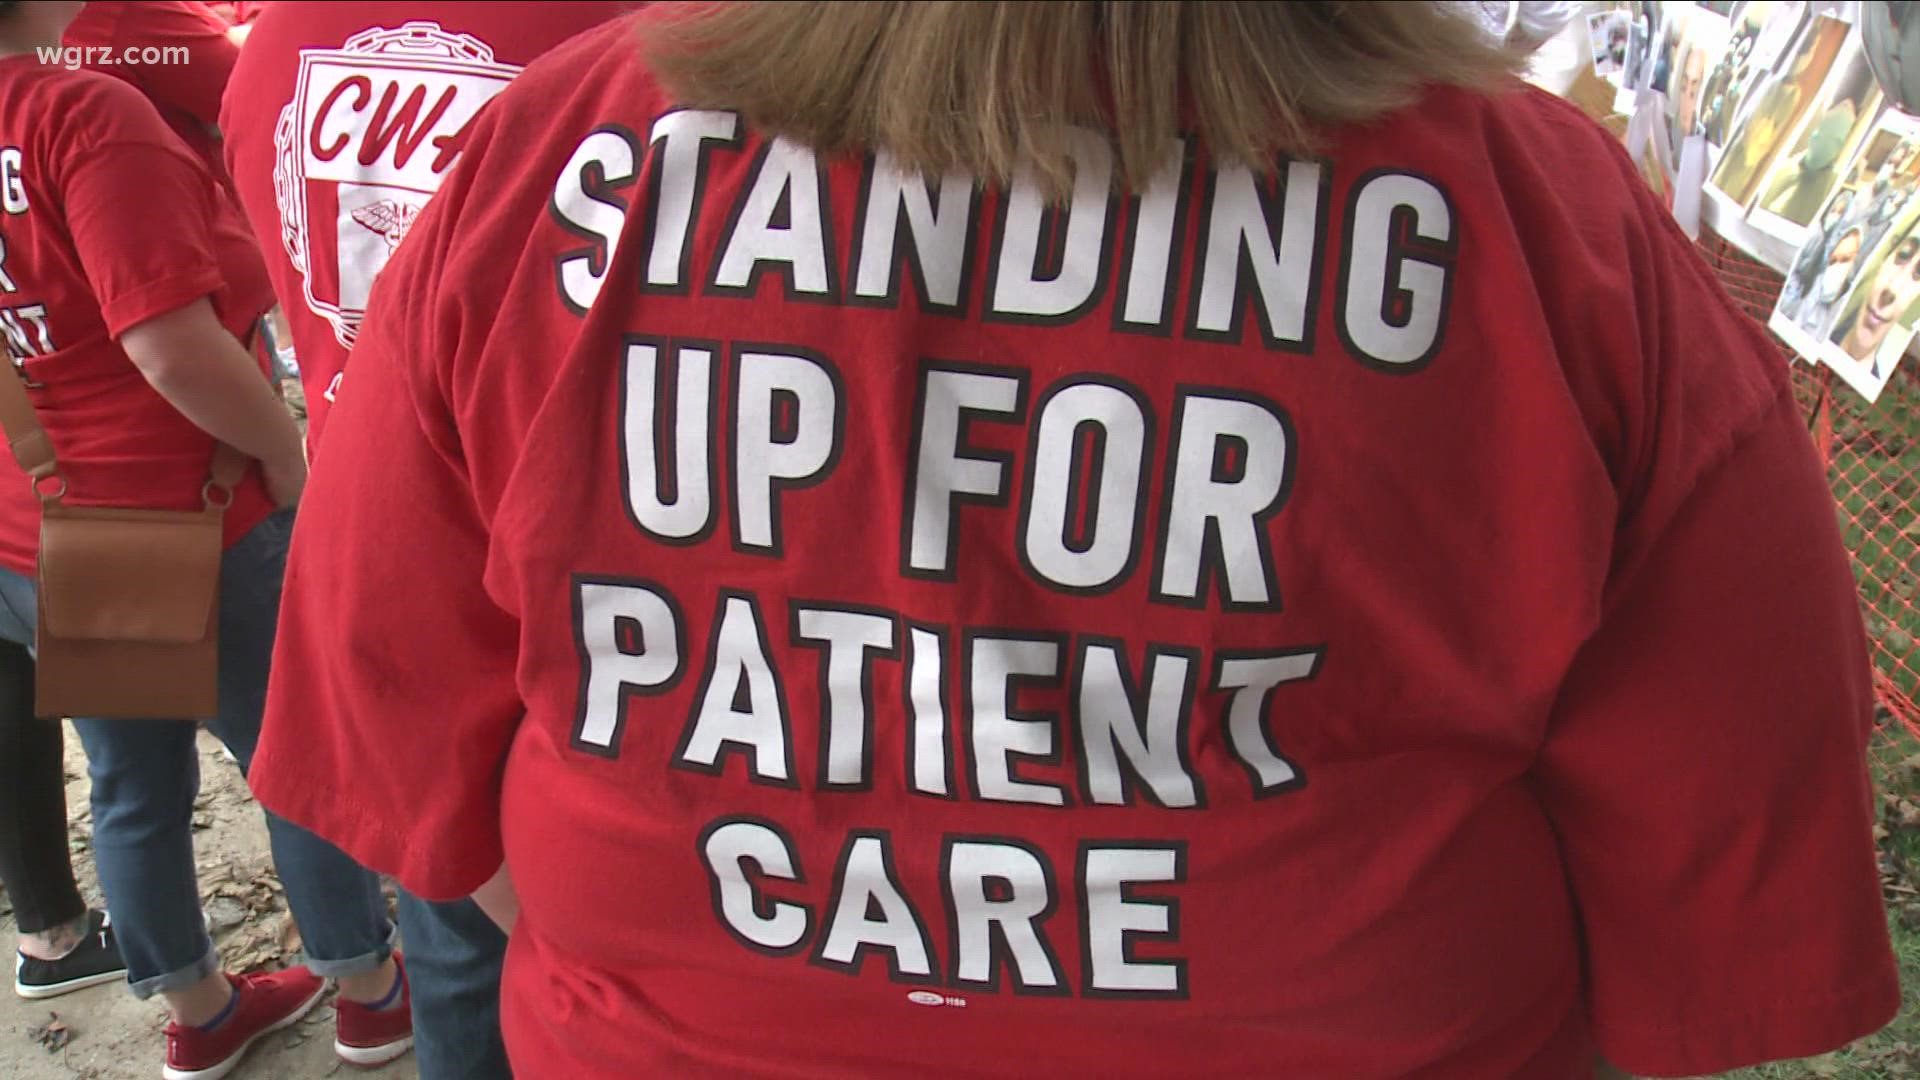 We're starting to see the impact the CWA strike is having on other Western New York hospitals, since operations are very limited at South Buffalo Mercy Hospital.